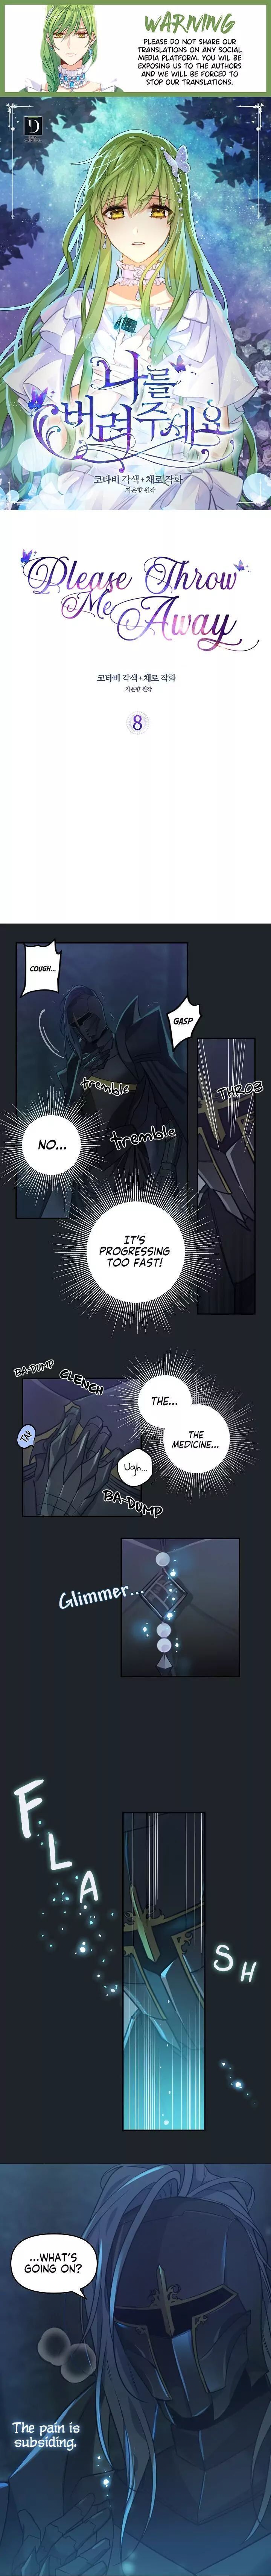 Please Throw Me Away Chapter 008 page 1